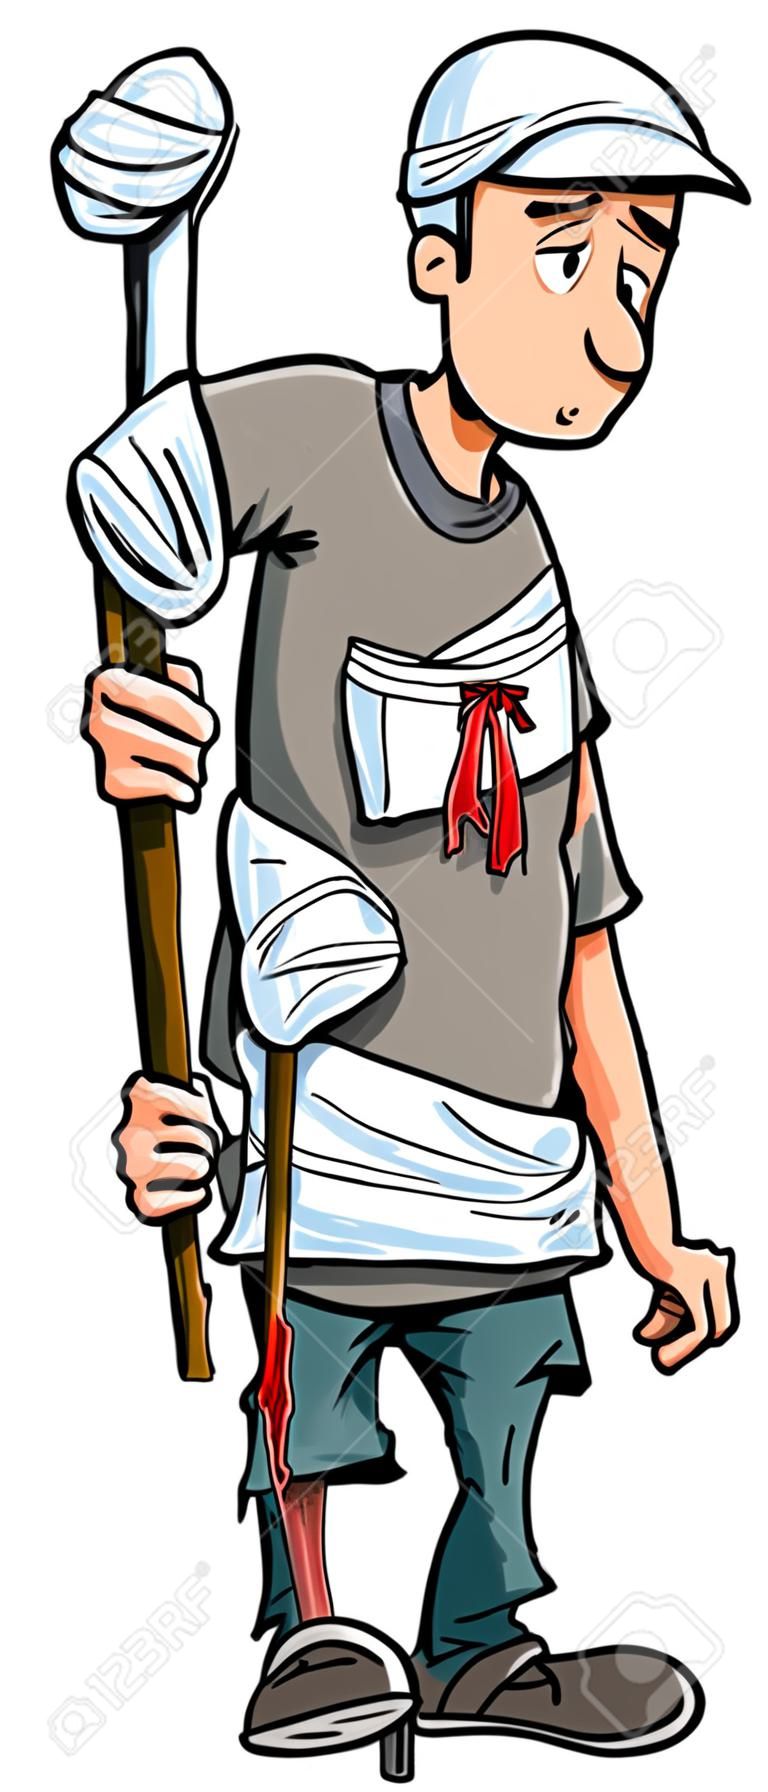 Cartoon injured man with walking stick and bandages. Isolated